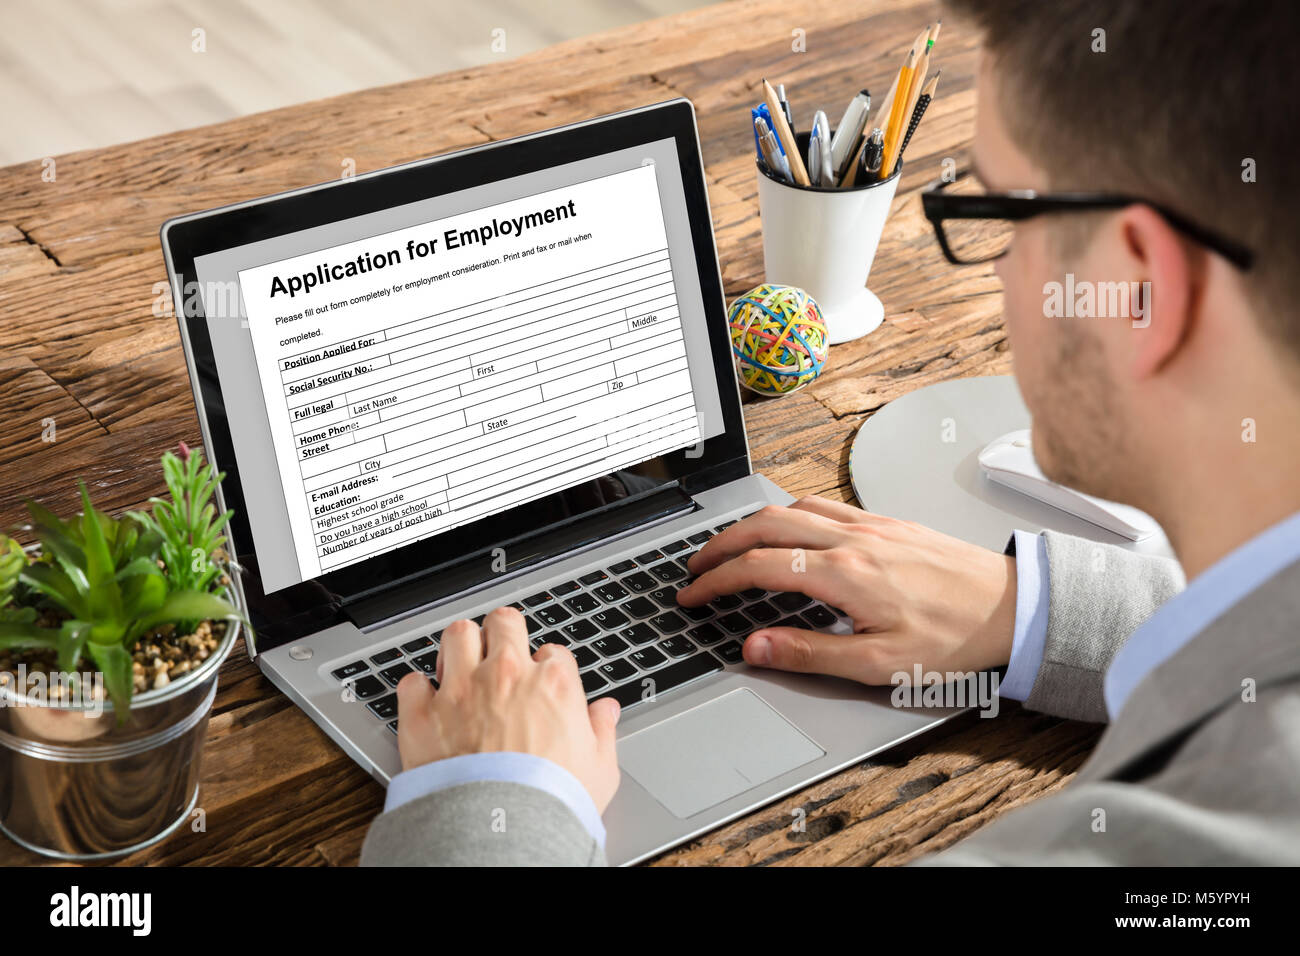 Close-up Of A Young Businessman Filling Application For Employment Form On Laptop At Workplace Stock Photo